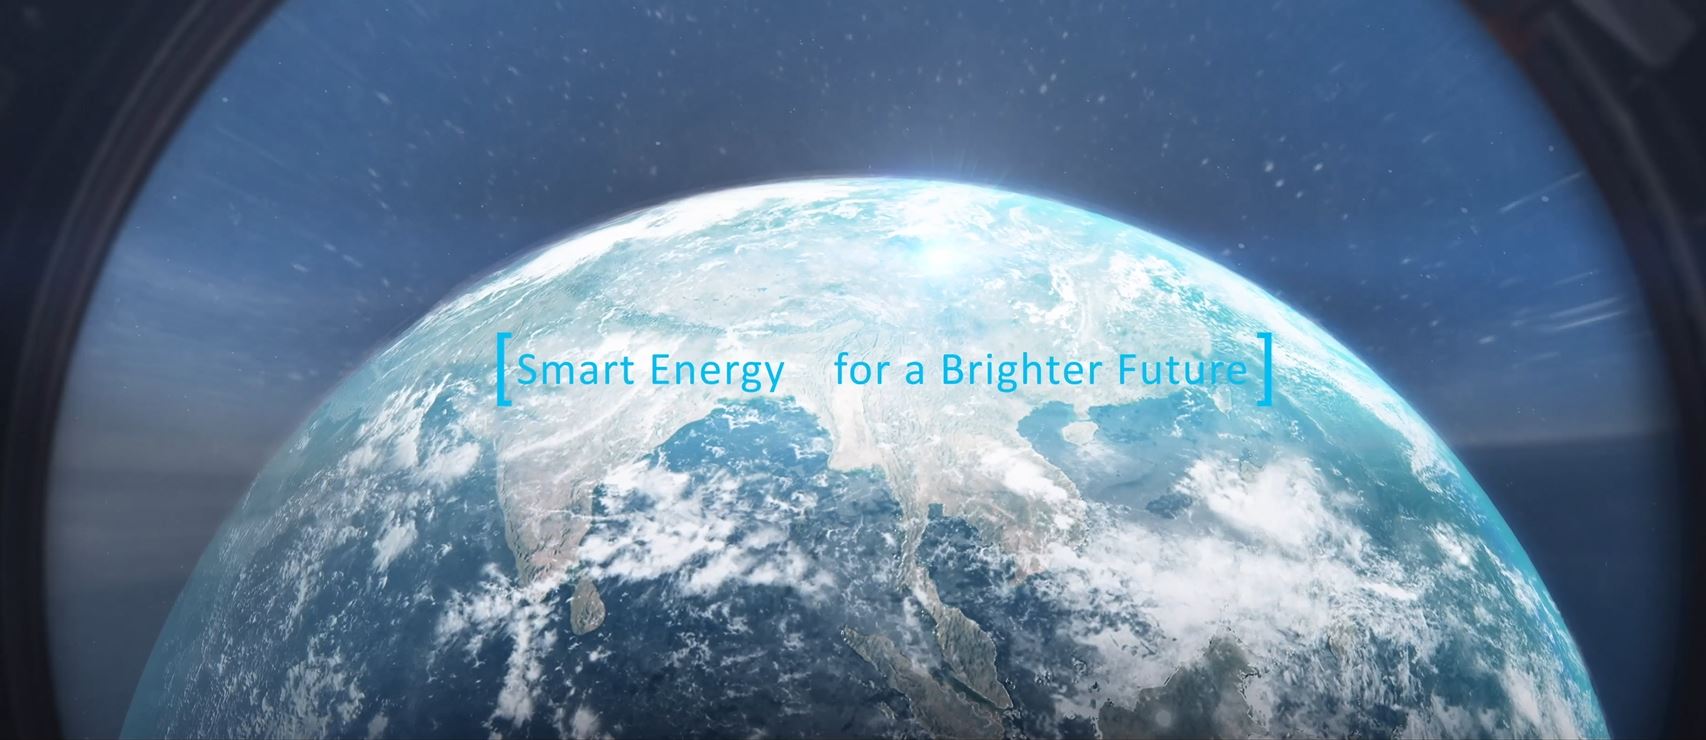 Smart Energy for a Brighter Future